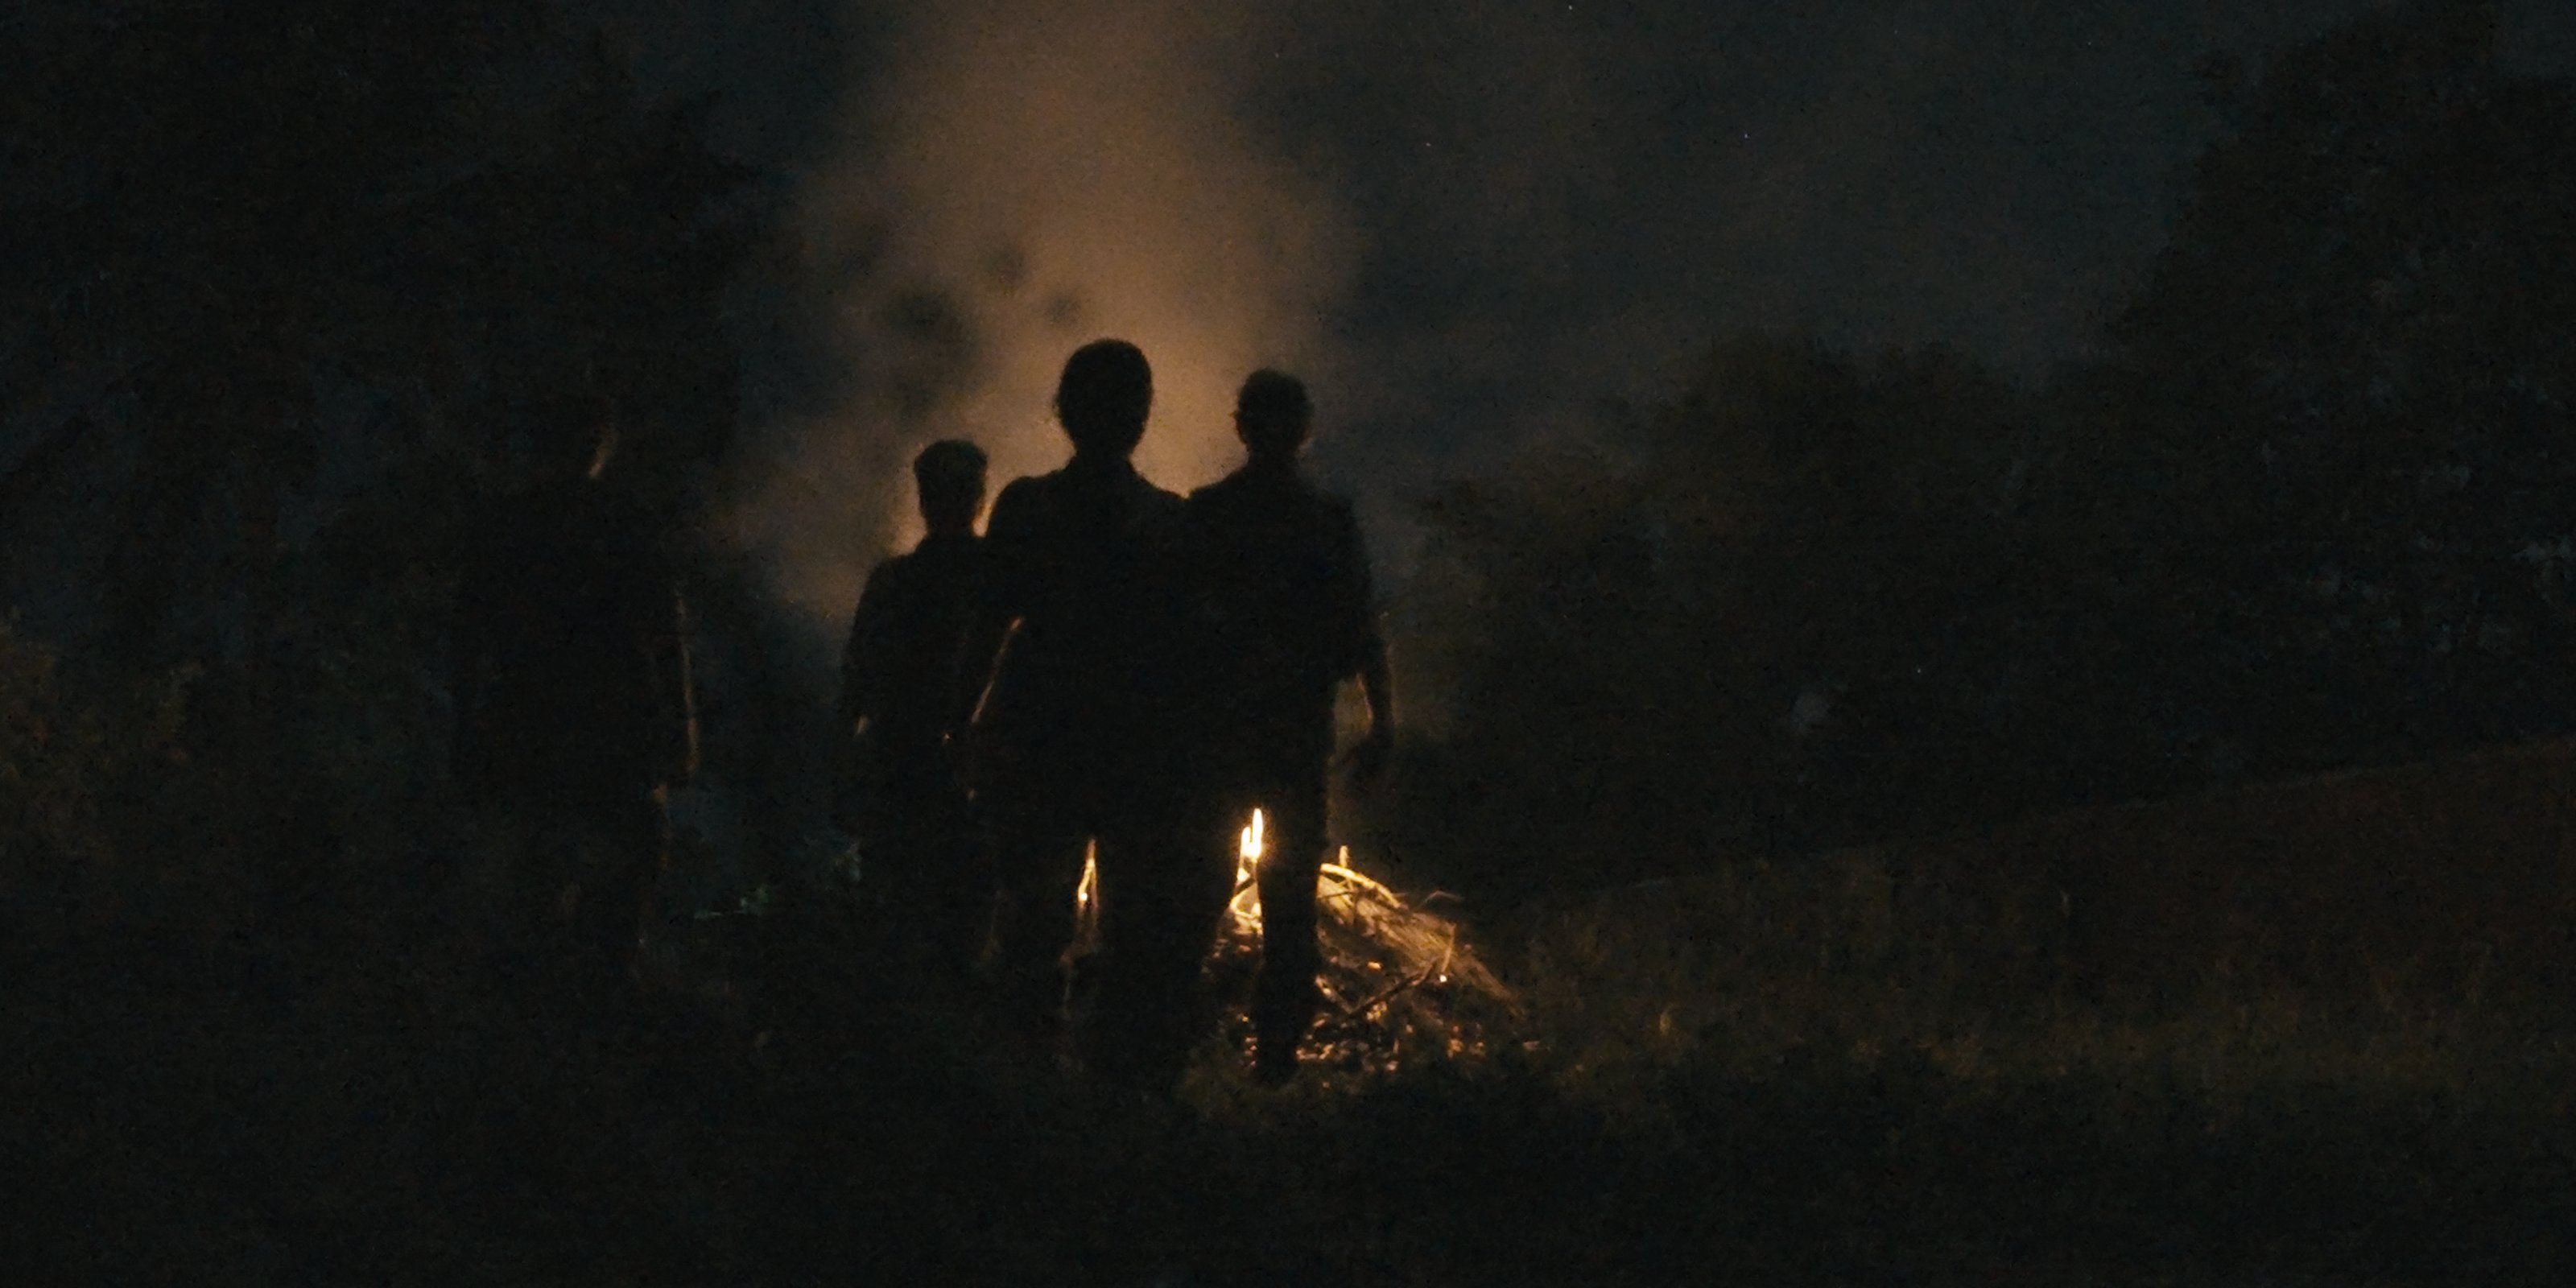 A silhouette of three people looking at a lit fire at dusk, seen from behind.